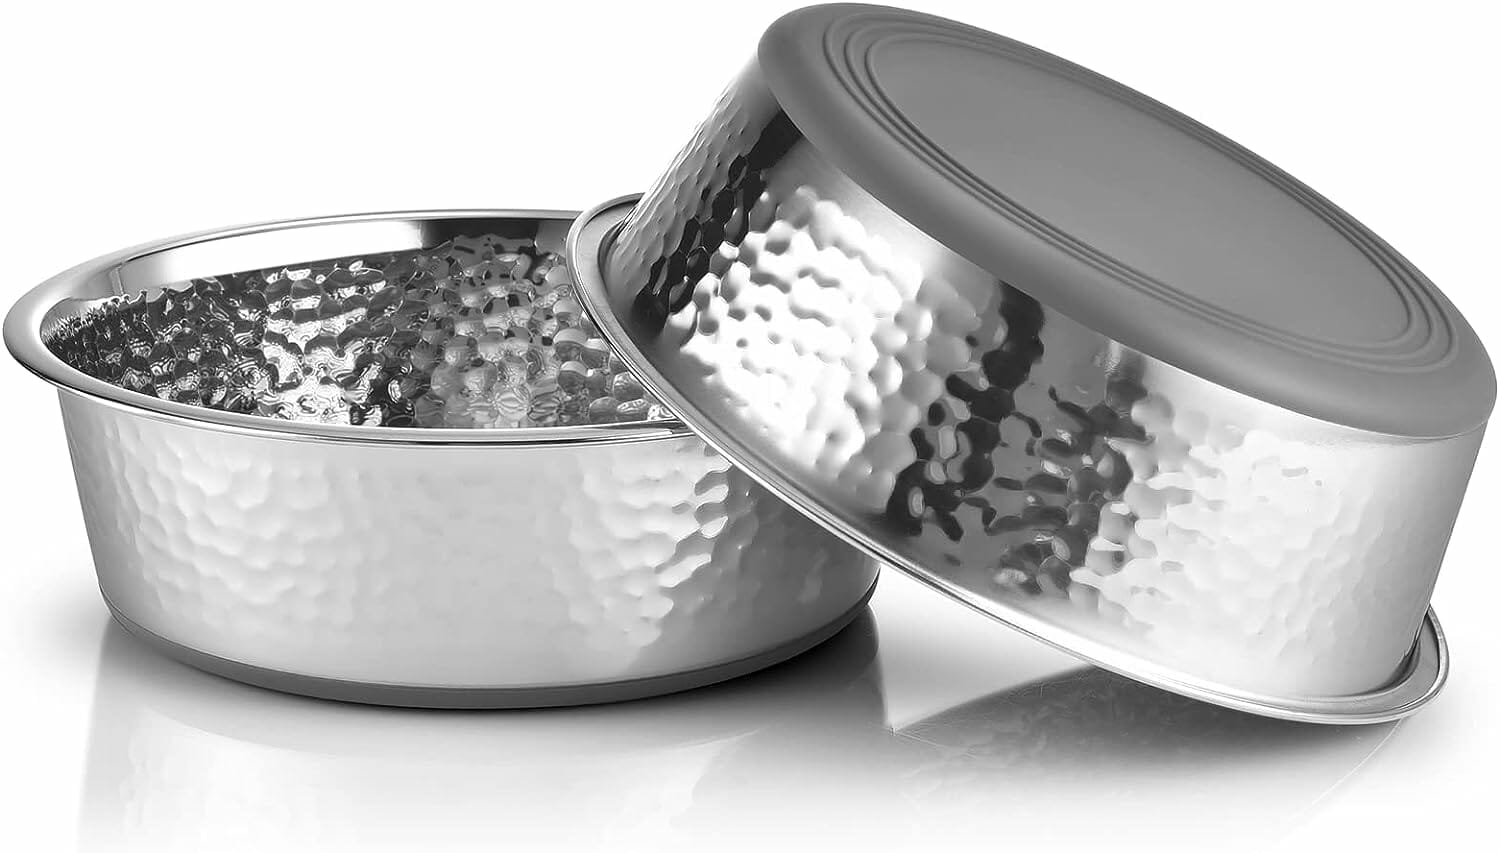 URBUDDIES 2 Pack Stainless Steel Dog Bowls Review